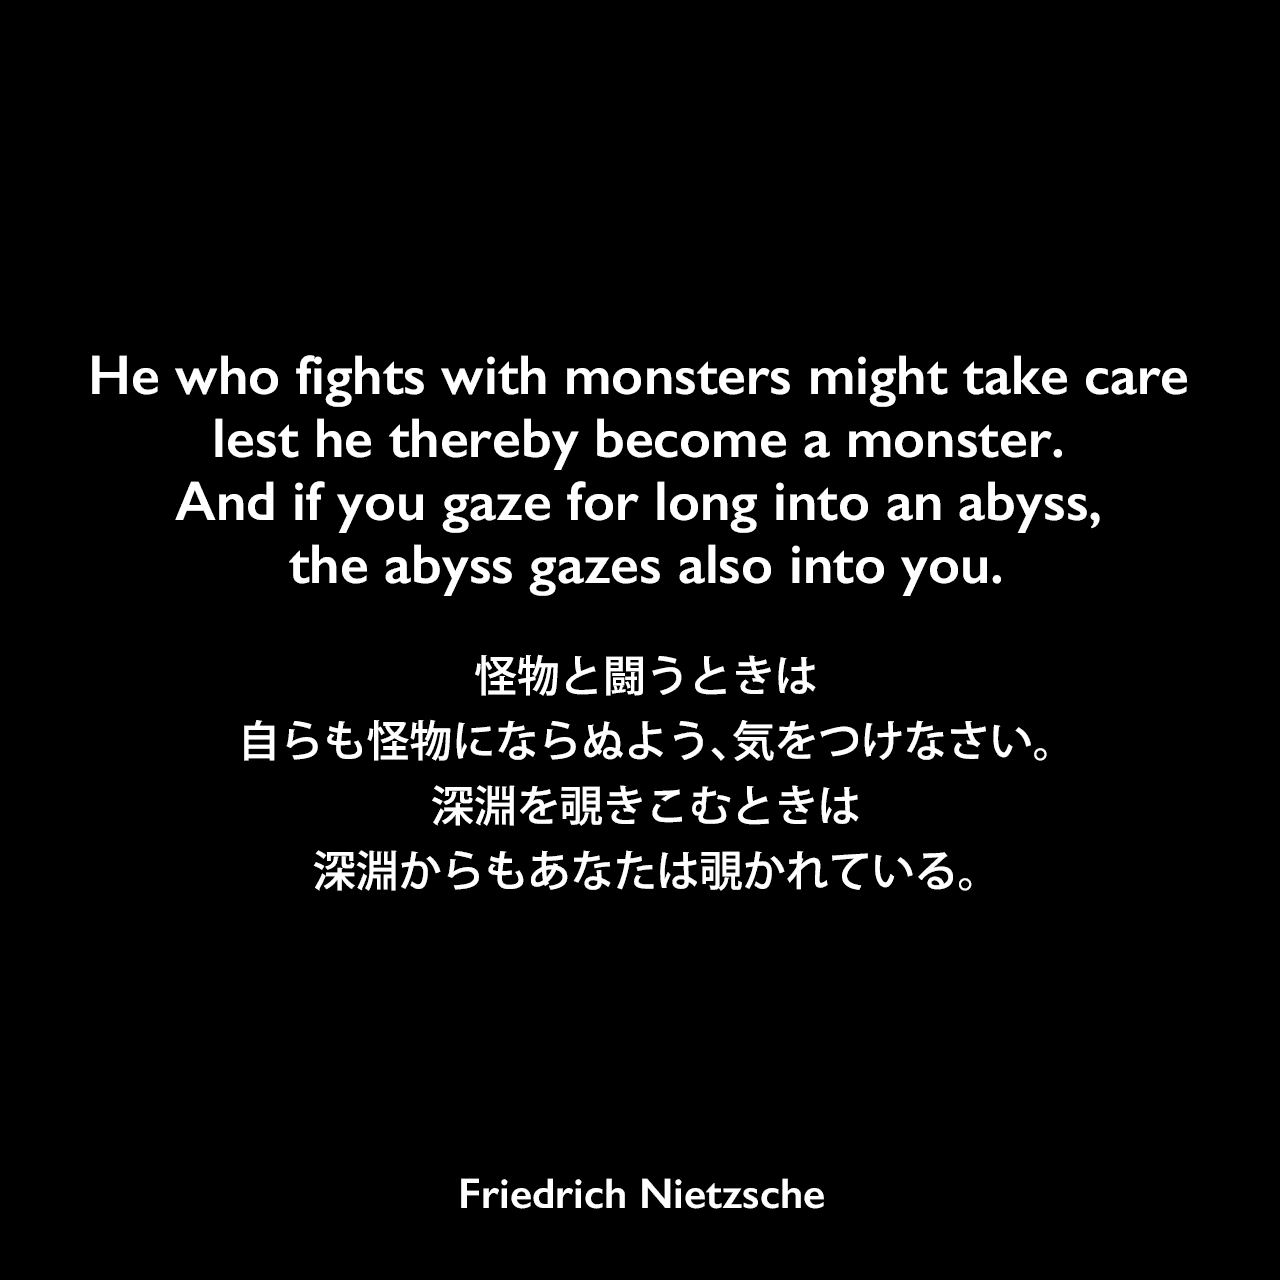 He who fights with monsters might take care lest he thereby become a monster. And if you gaze for long into an abyss, the abyss gazes also into you.怪物と闘うときは、自らも怪物にならぬよう、気をつけなさい。深淵を覗きこむときは、深淵からもあなたは覗かれている。- ニーチェの本 「善悪の彼岸」よりFriedrich Nietzsche